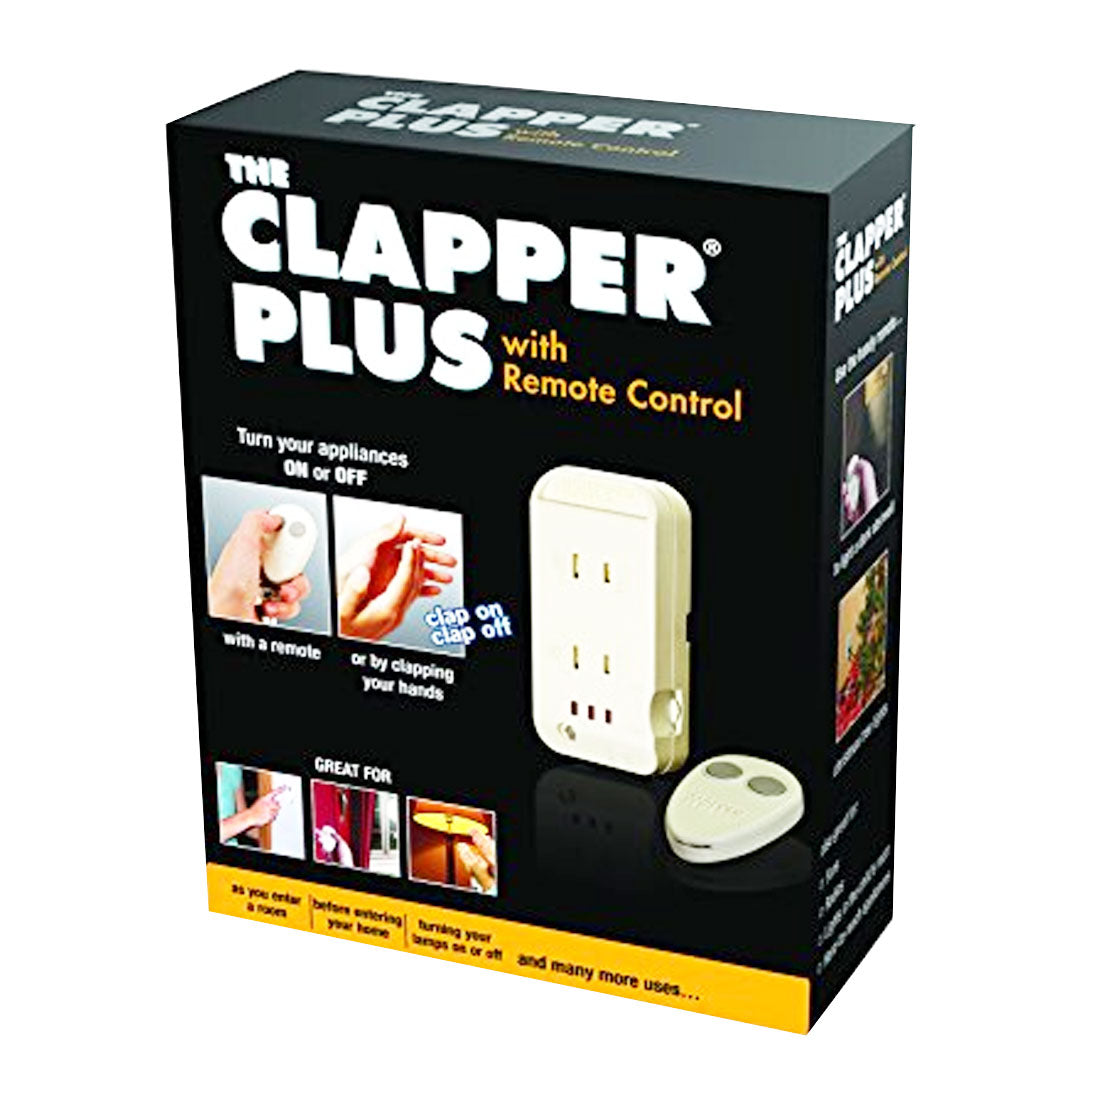 The Clapper, The Original Home Automation Sound Activated Device